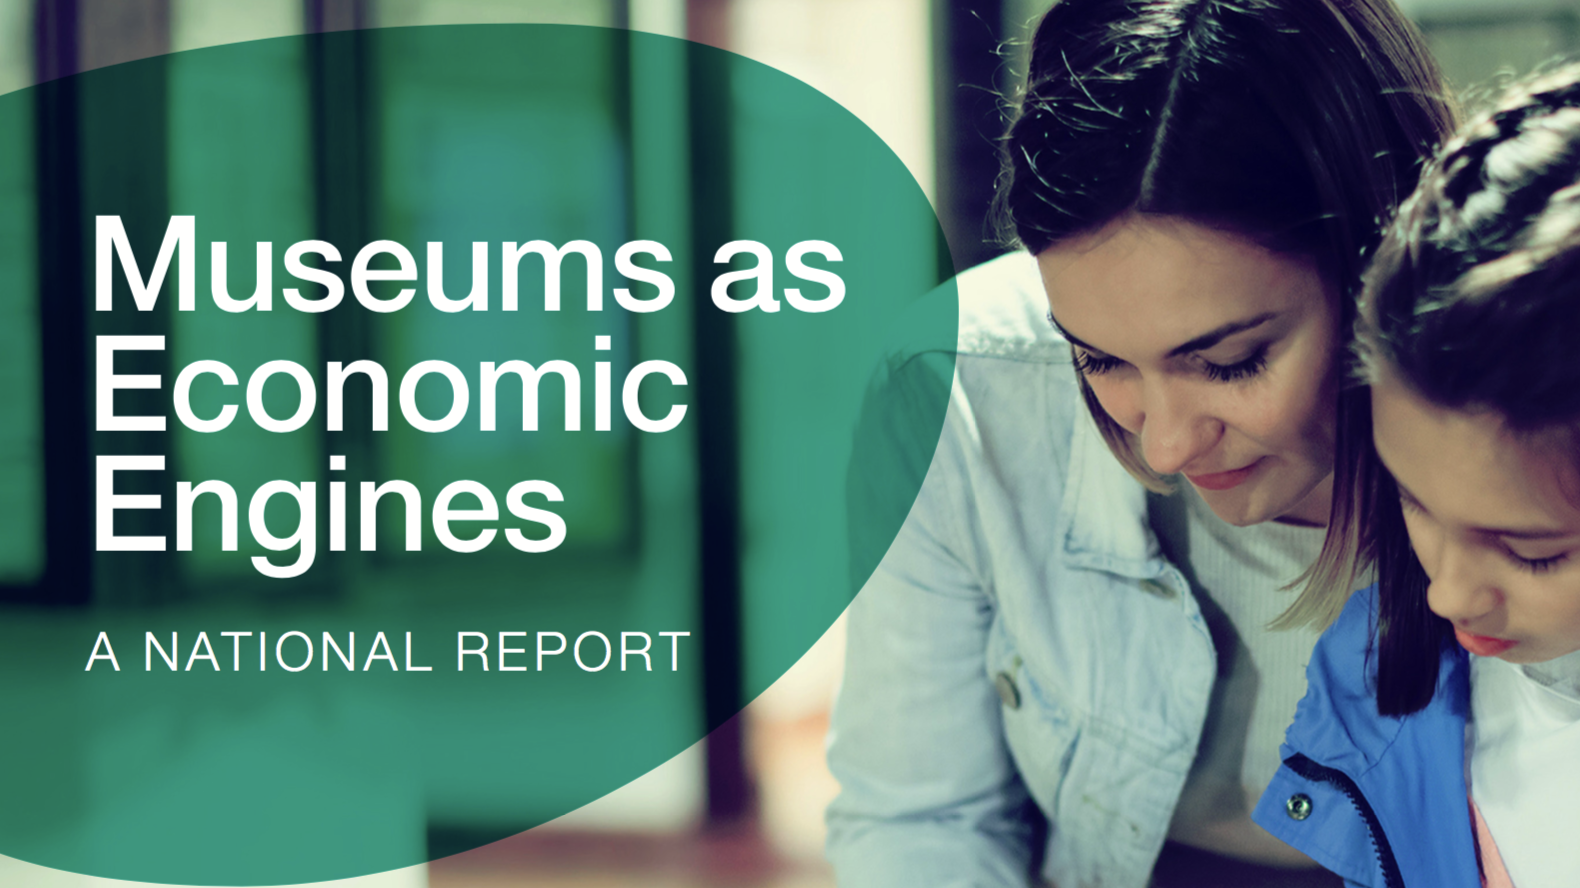 Cover Image of the Museums as economic engines report. Shows a woman with a younger girls looking down together as an unseen object